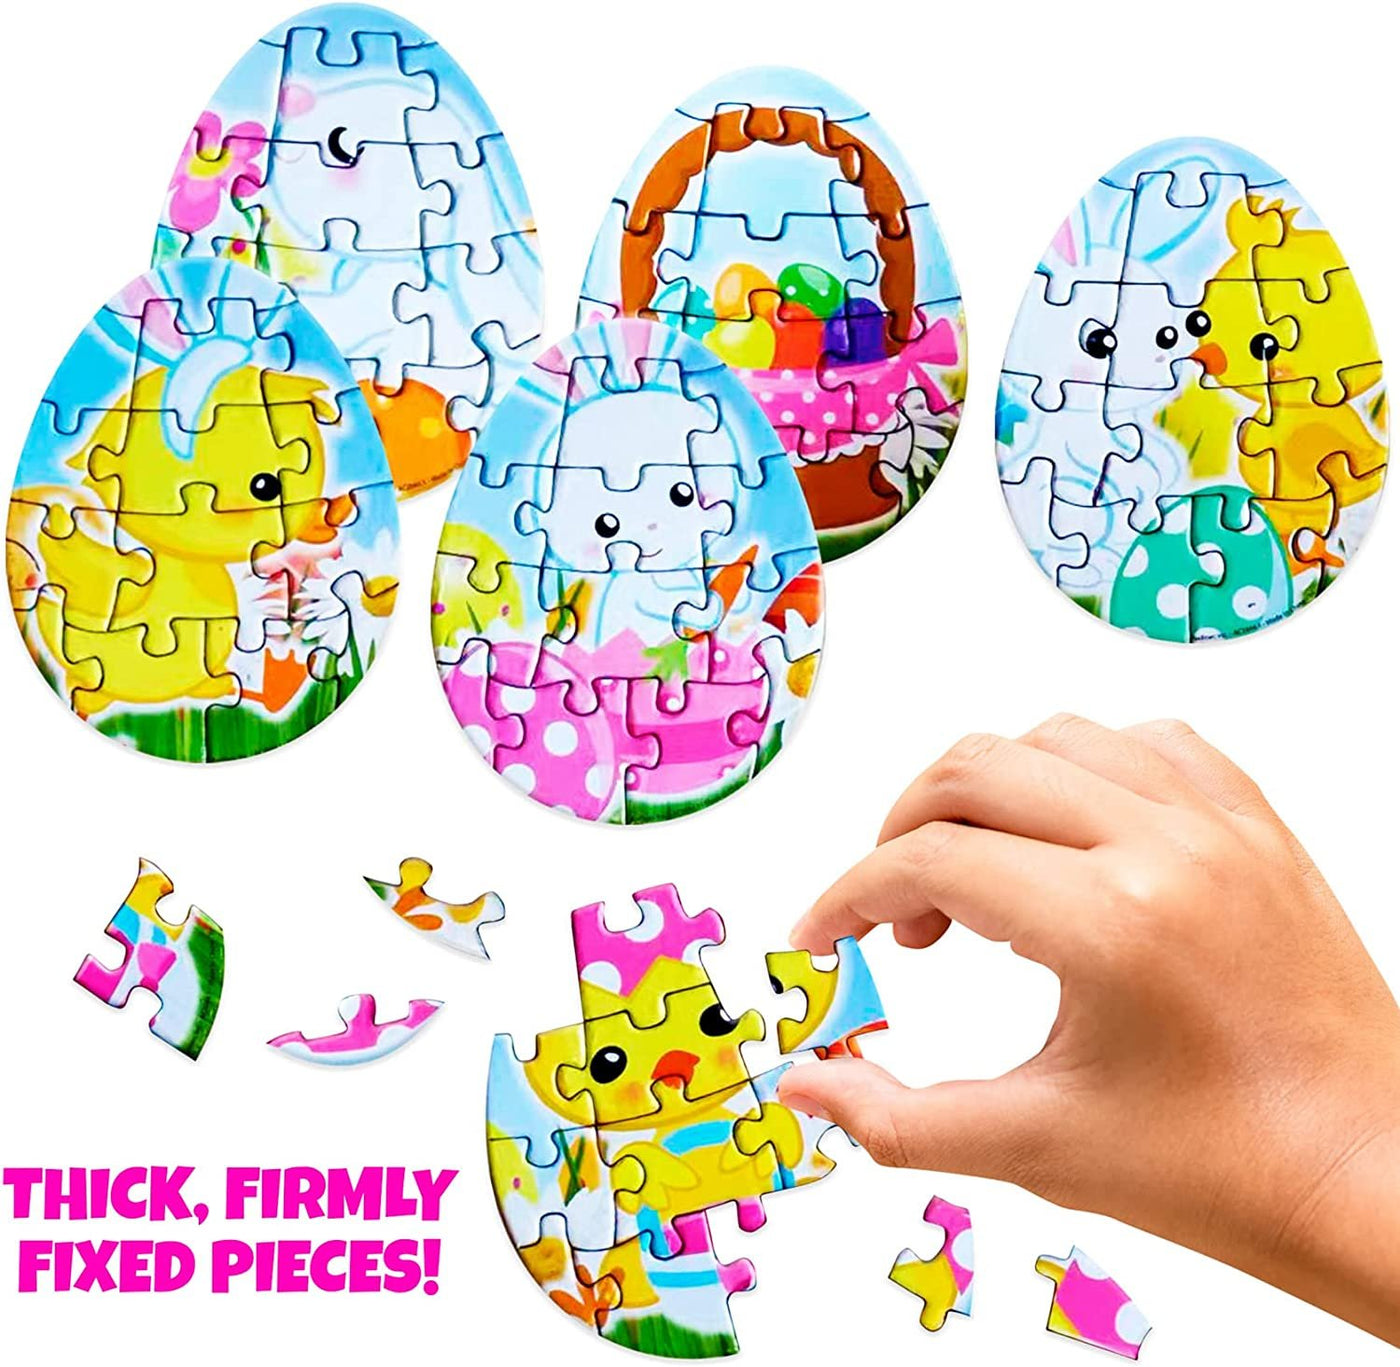 Pre-Filled Easter Eggs with Puzzles Inside - Set of 24 - Colorful Surprise Eggs for Kids with Jigsaw Puzzles - Easter Egg Hunt Supplies - Easter Basket Fillers and Goodie Bag Stuffers